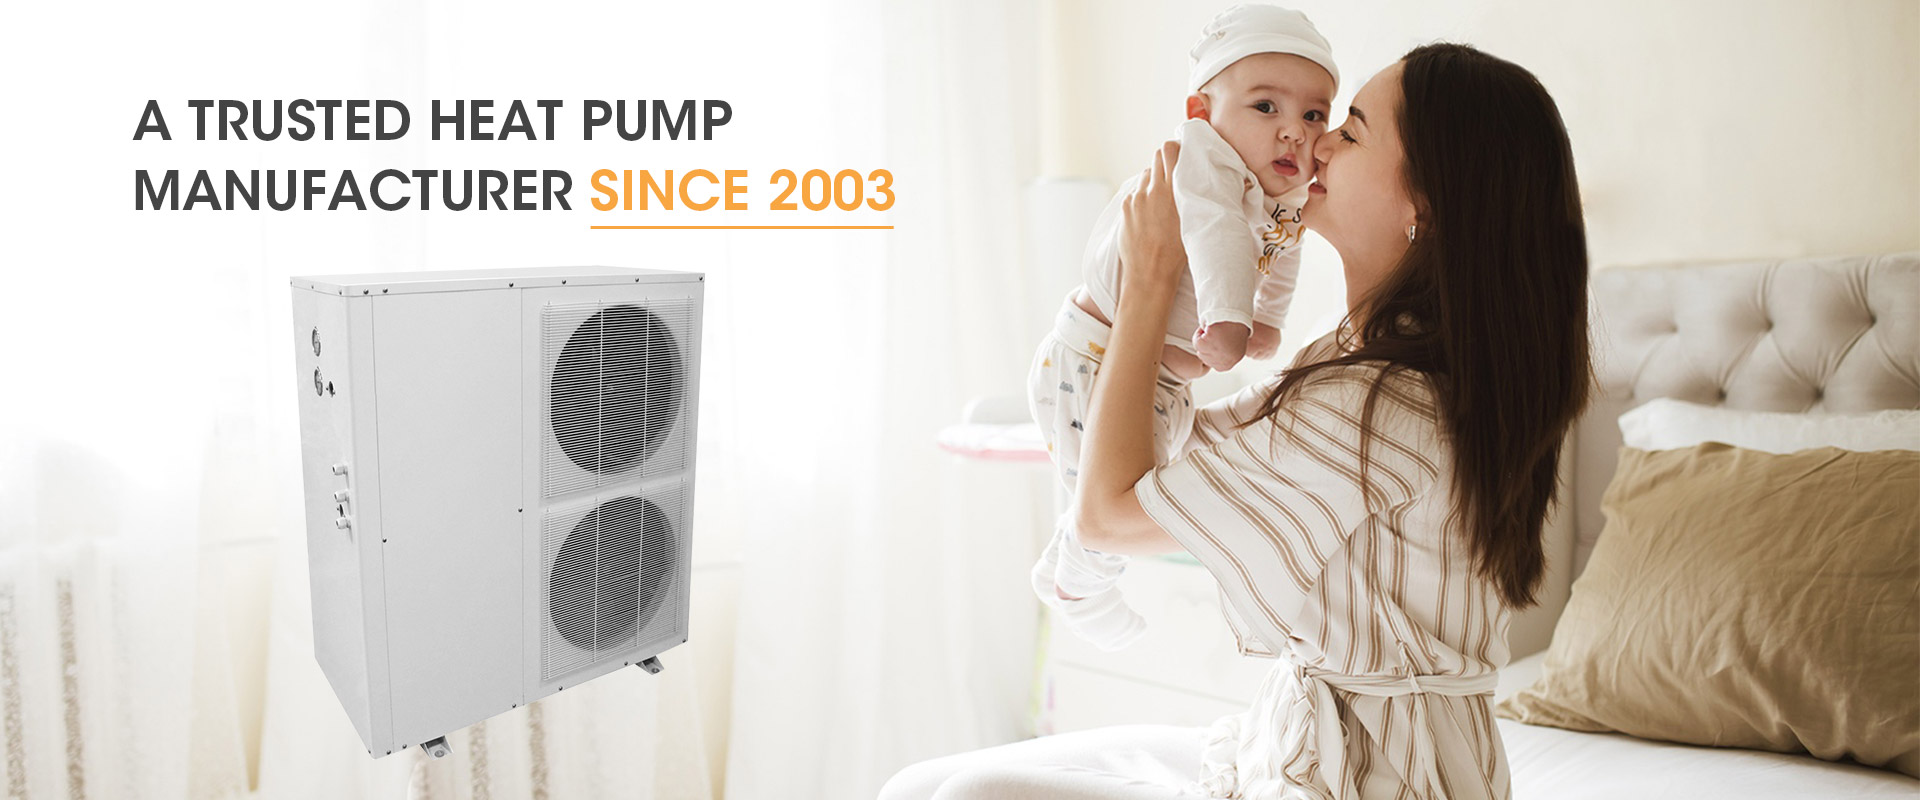 how to calculate heat pump size for swimming pool